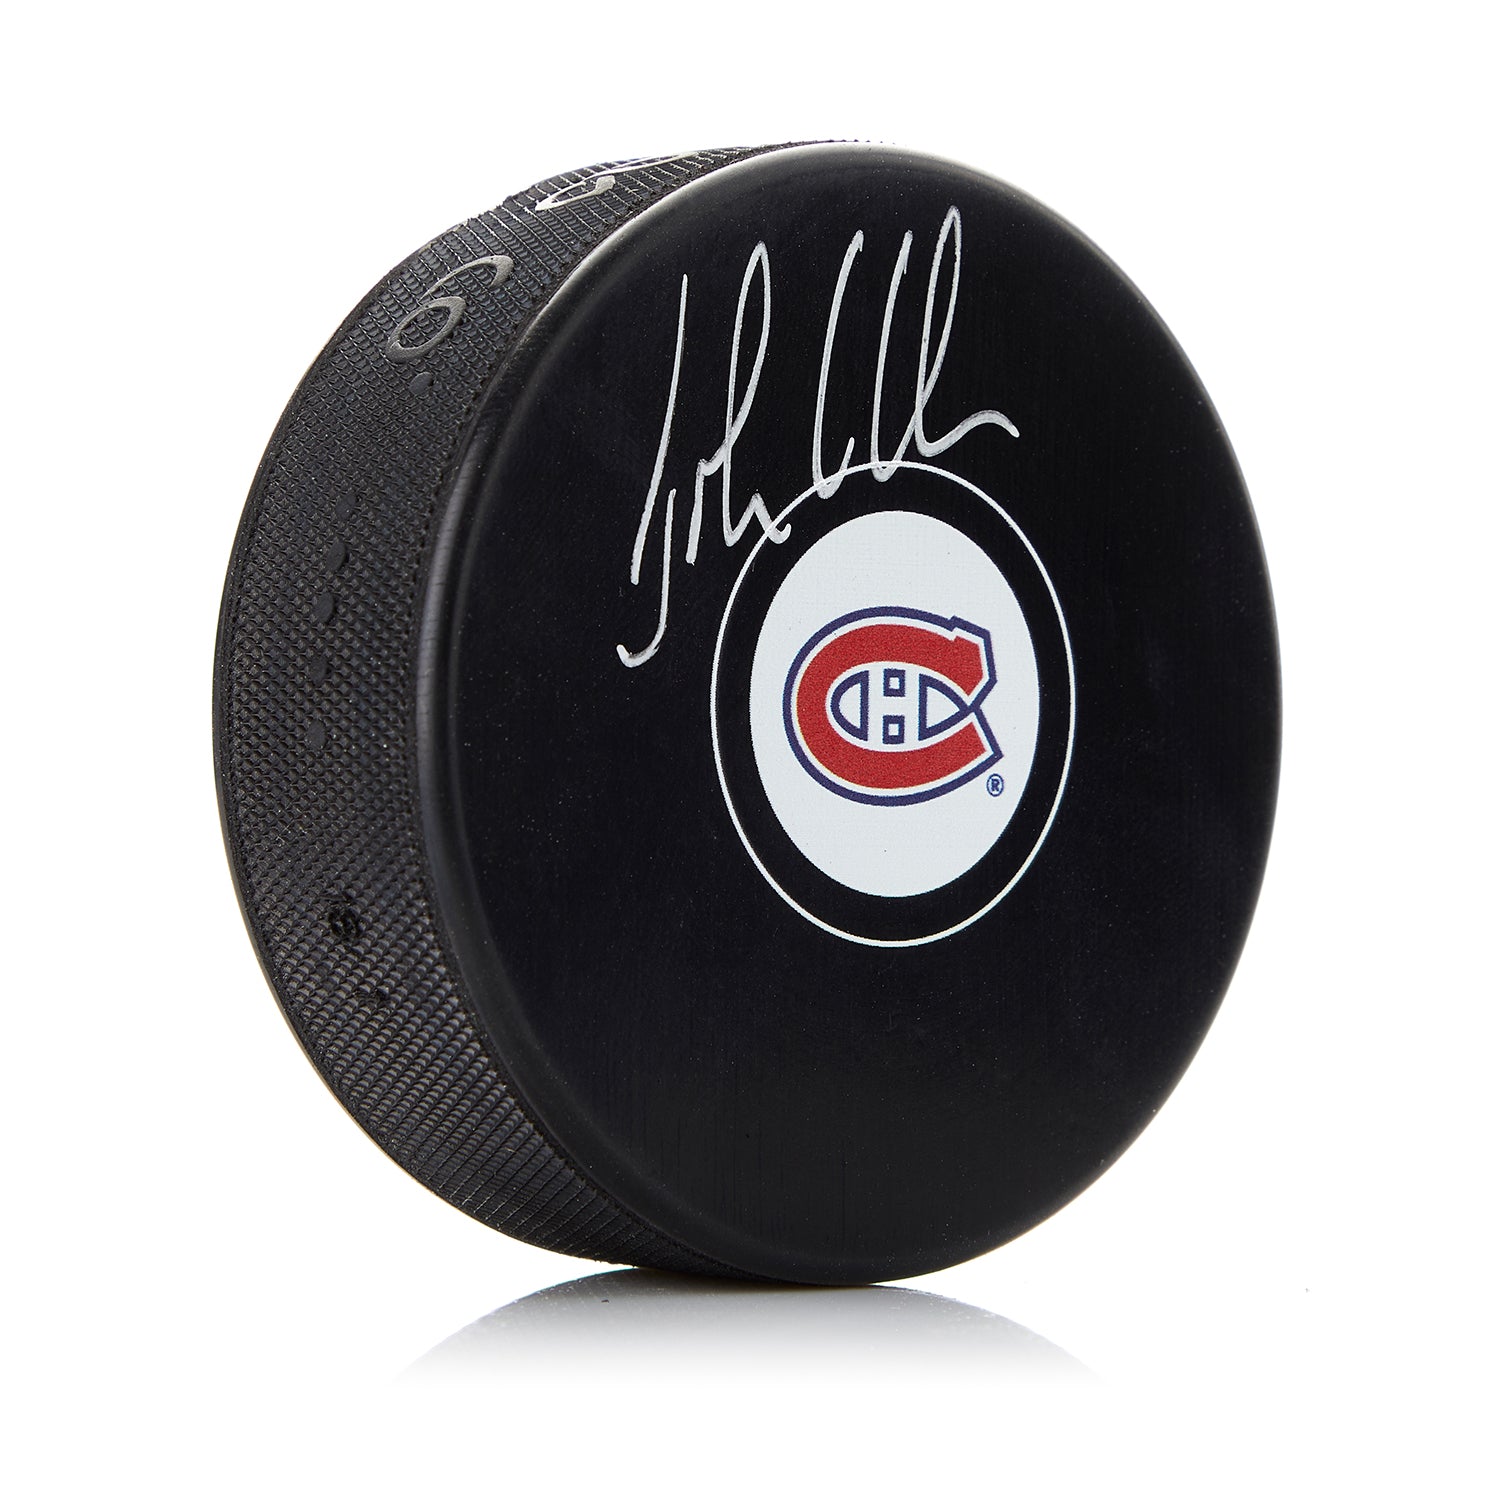 John LeClair Montreal Canadiens Autographed Hockey Puck